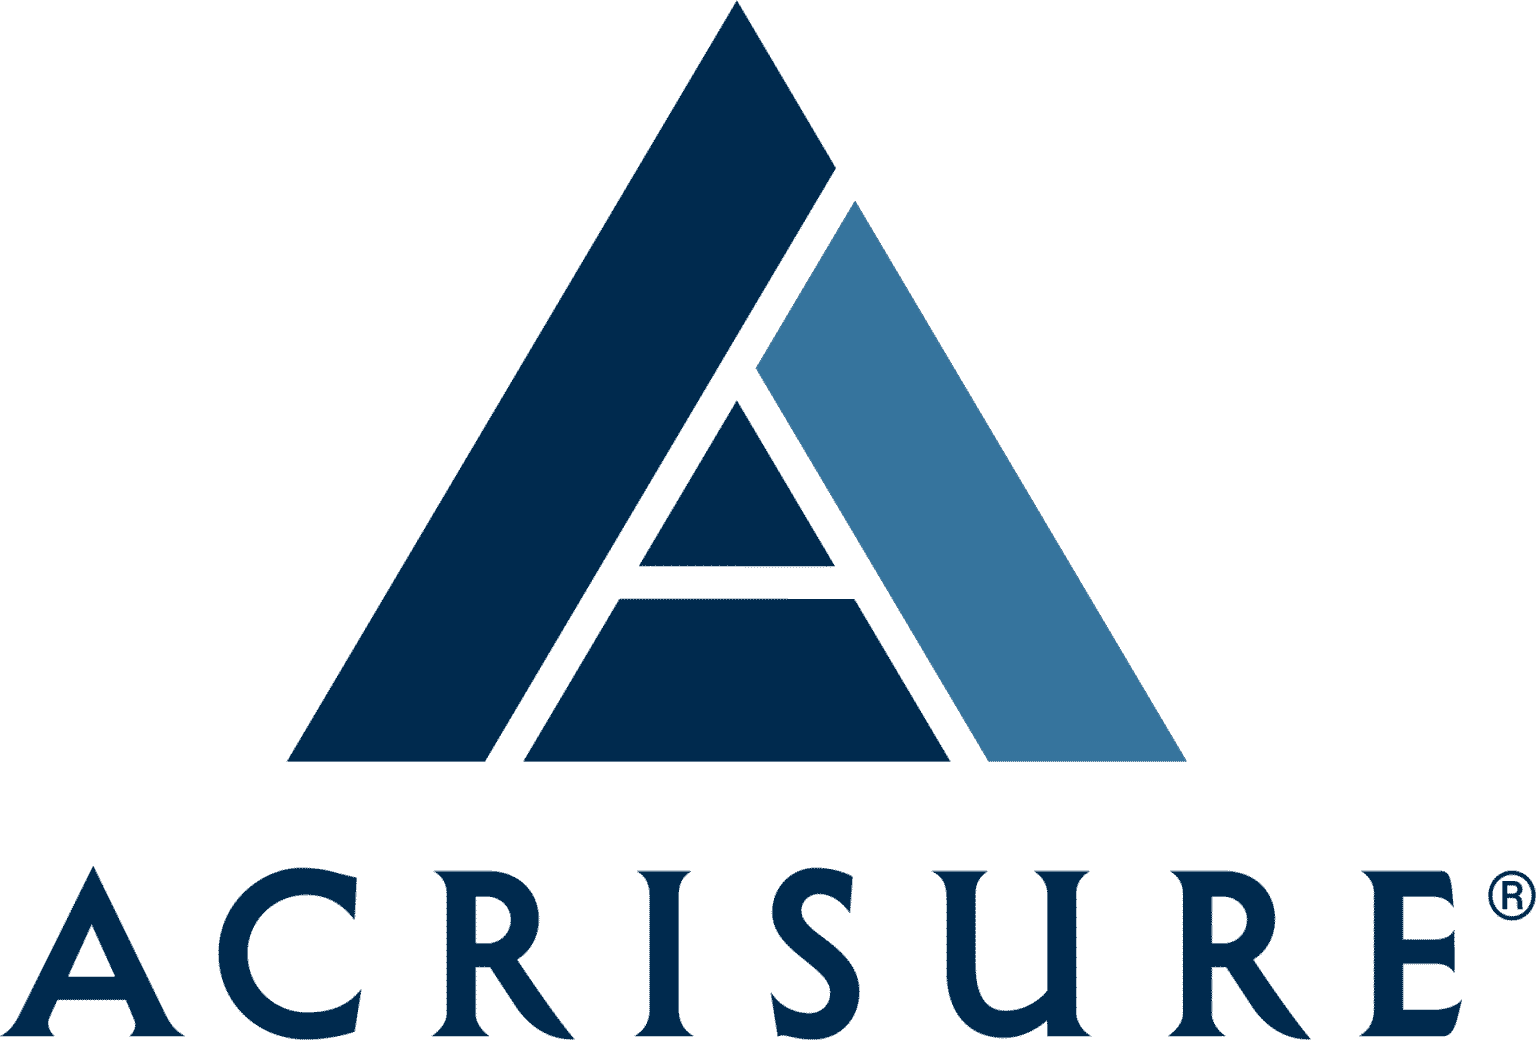 Acrisure: Financial Services Solutions Driven by Intelligence